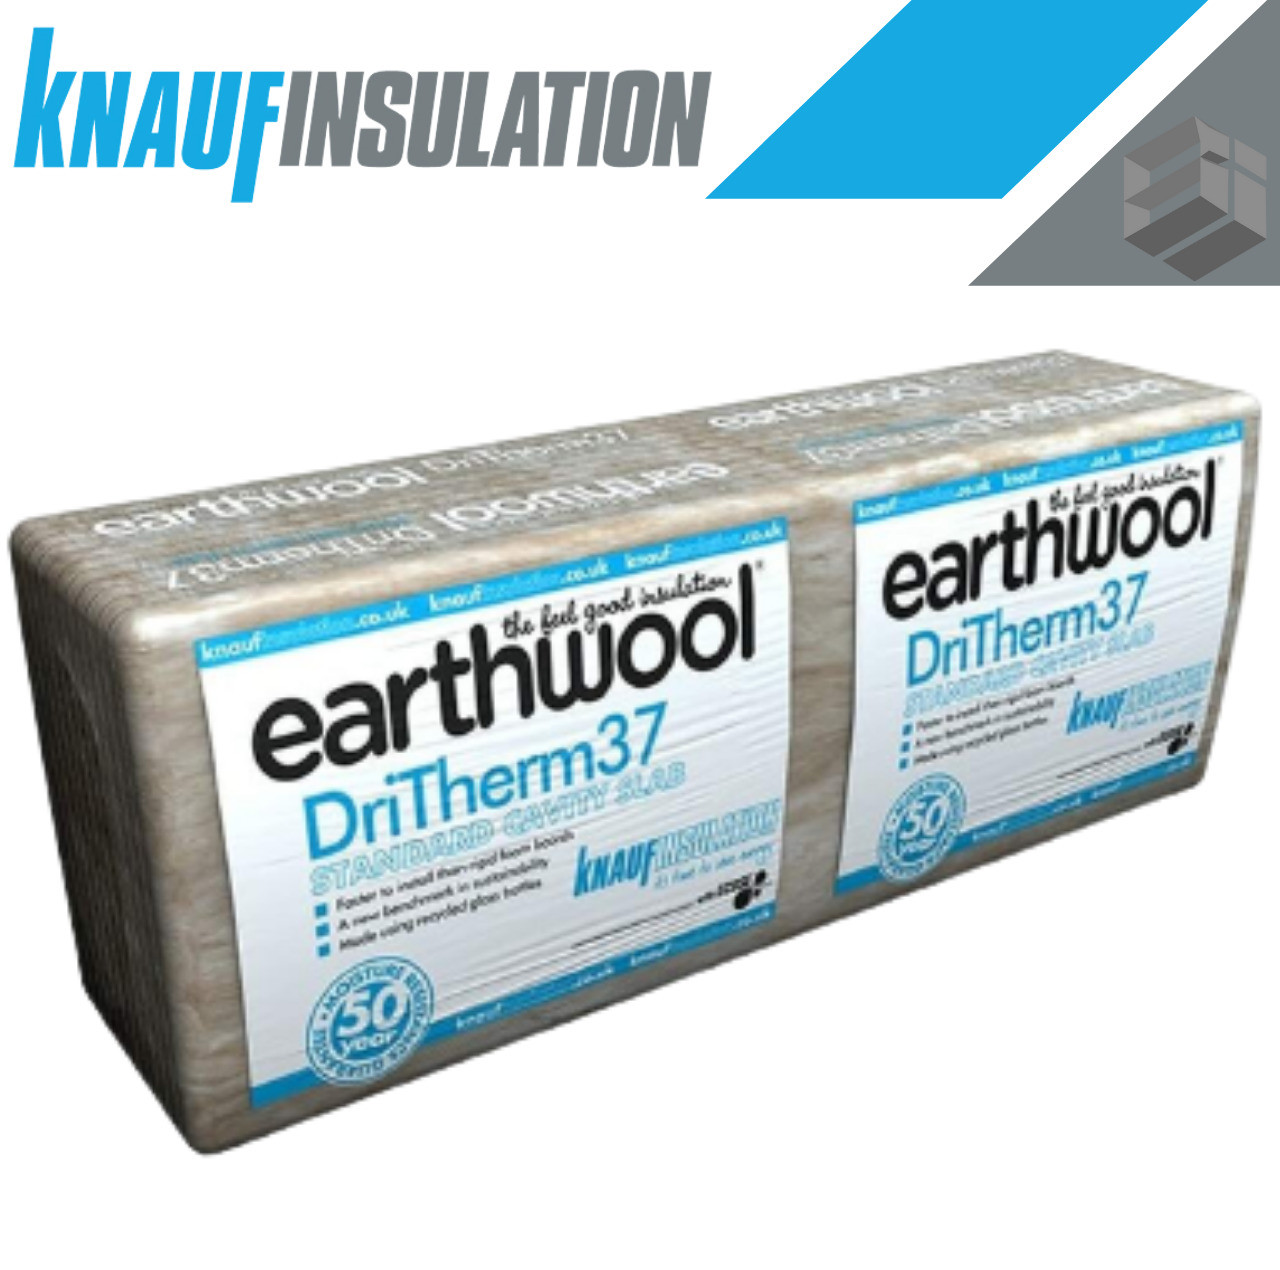 100mm - Knauf DriTherm 37 100mm Cavity Wall Slab 6.55m2/Pack 10010048 KNF-50259